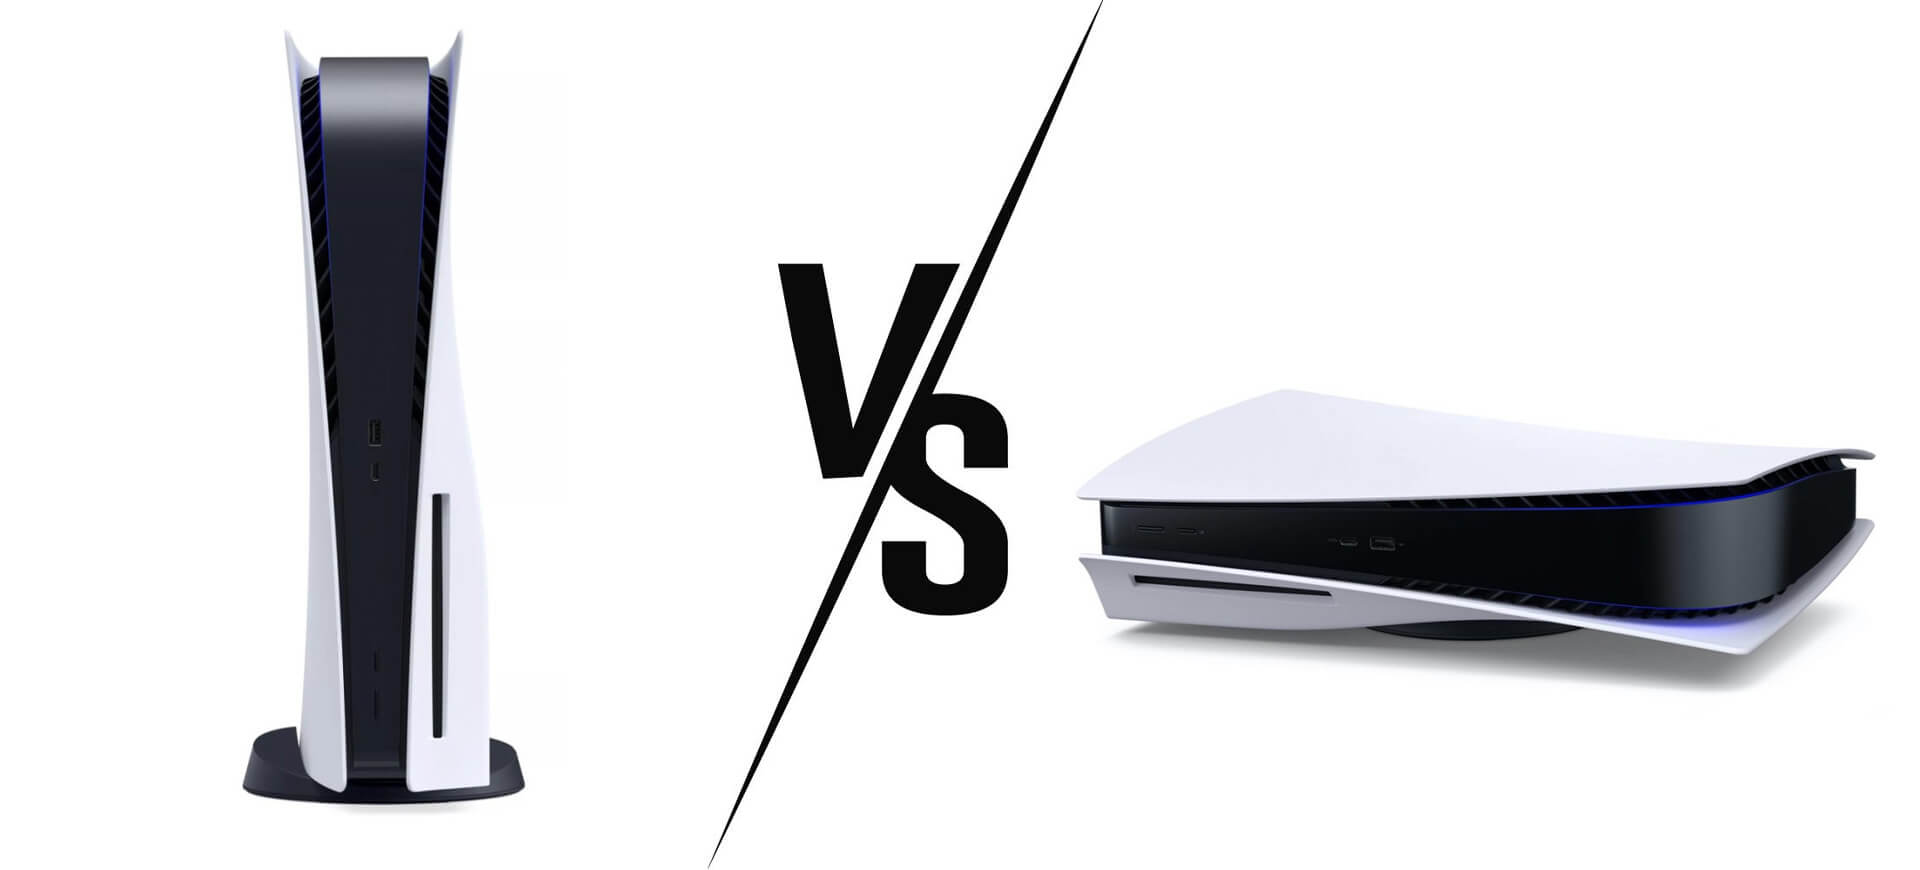 PlayStation 5 vs. Xbox Series X/S: What You Need To Know - WAYA